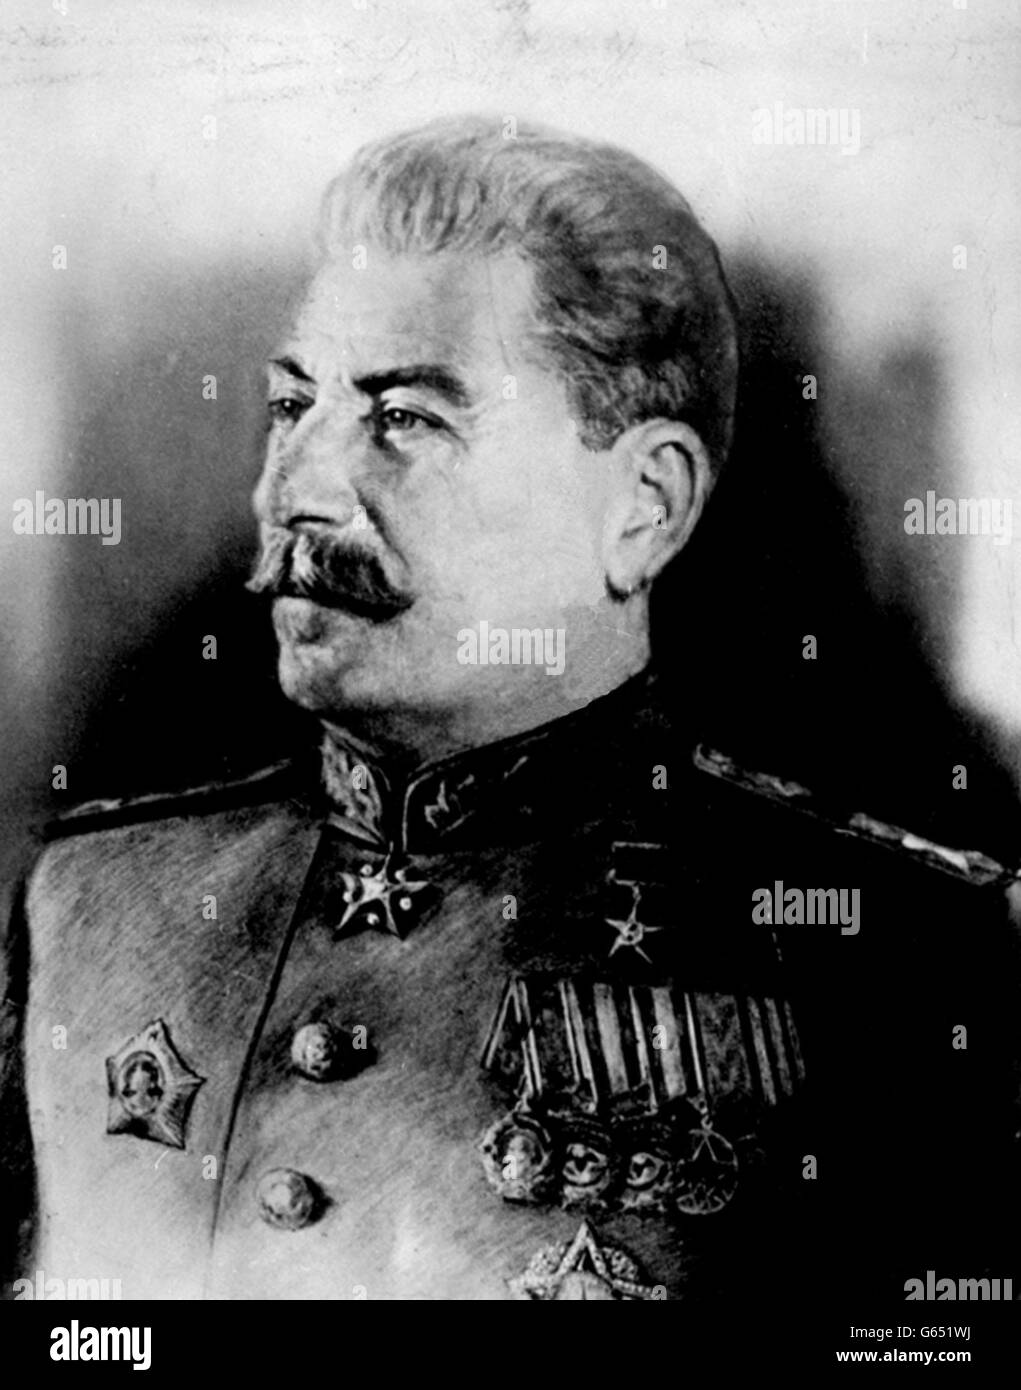 Undated picture of Jospeh Stalin *PLEASE NOTE NO INFORMATION AVAILABLE* 03/12/2004 Legendary wines from the cellars of 19th century Russian tsars and Joseph Stalin are set to sell for more than 500,000 when they are auctioned, Friday December 3, 2004 Stock Photo